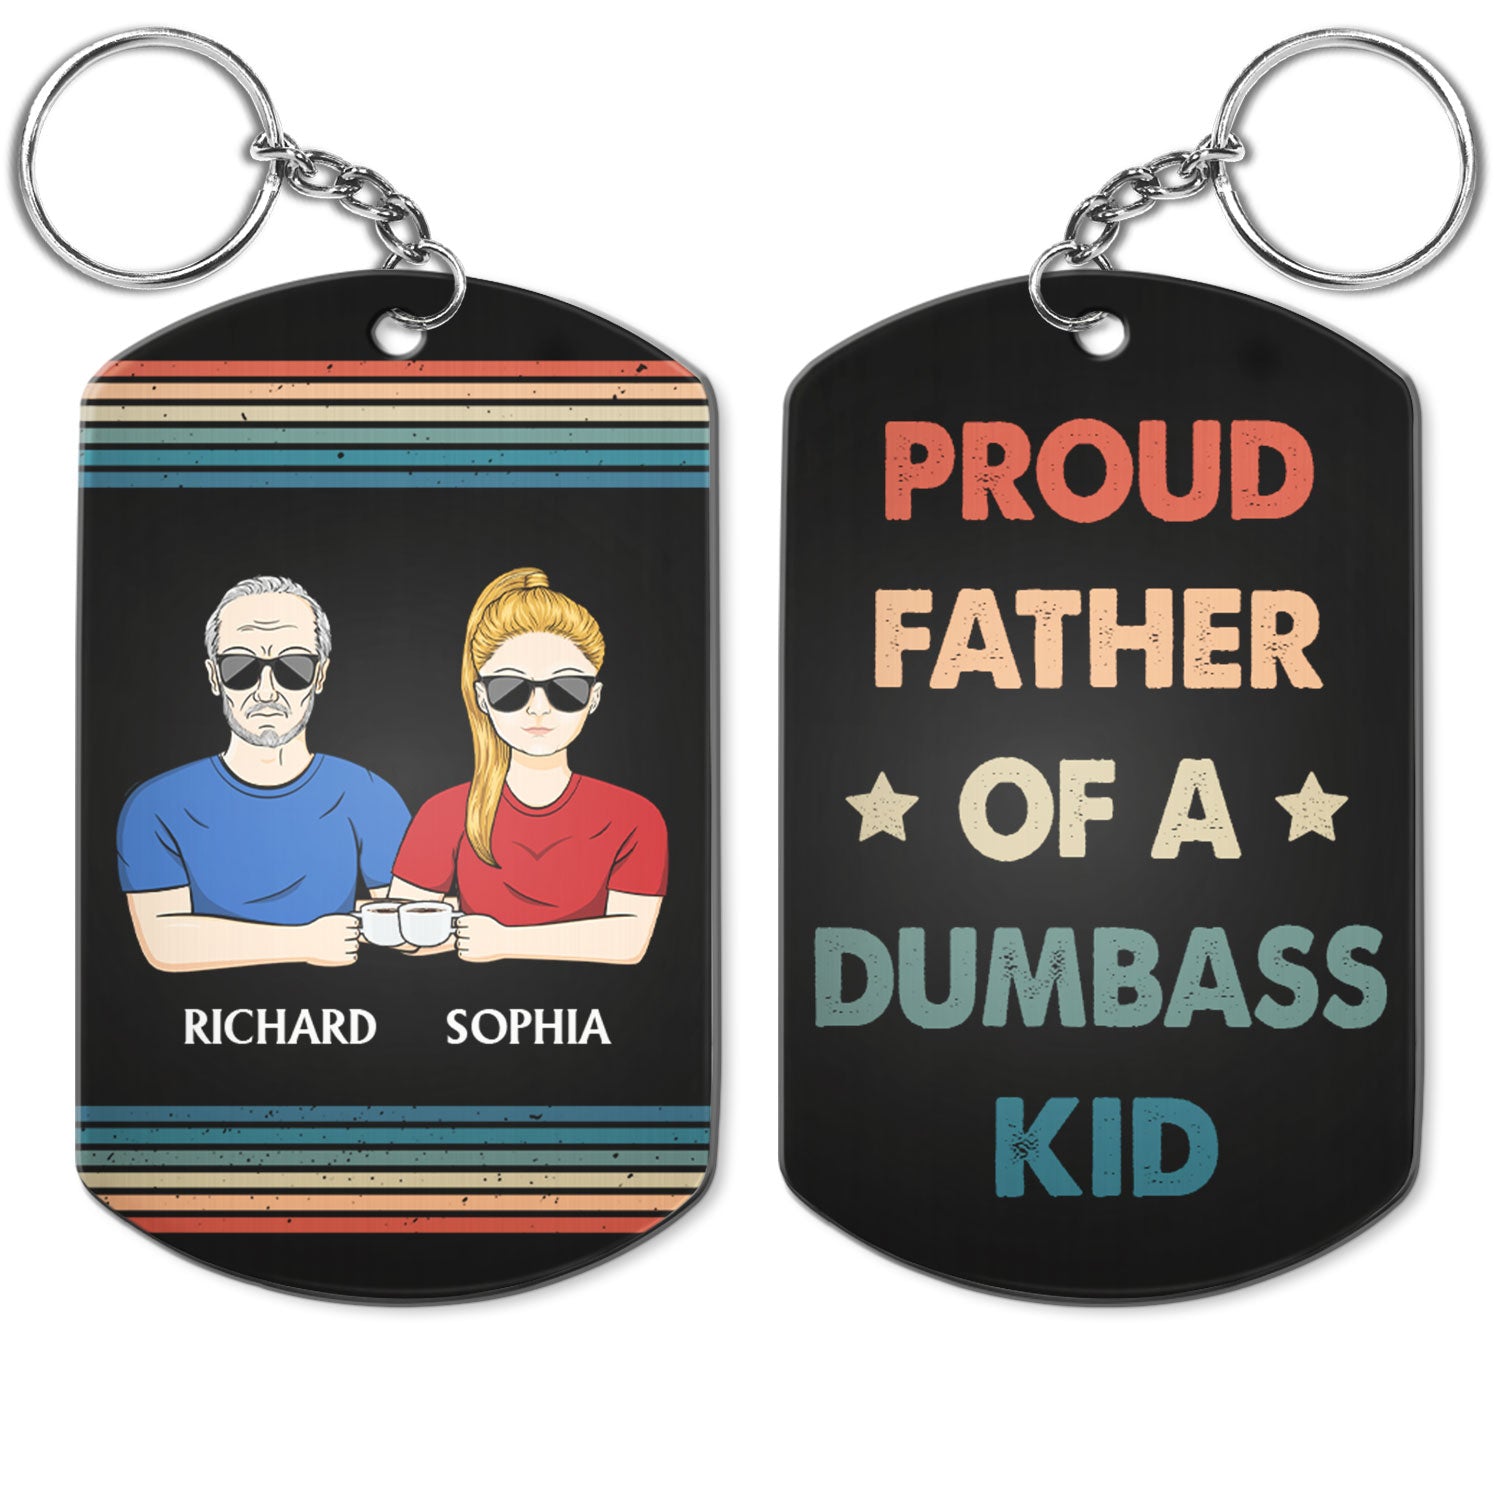 Proud Father Of A Few - Funny Gift For Dad, Father, Grandpa - Personalized Aluminum Keychain